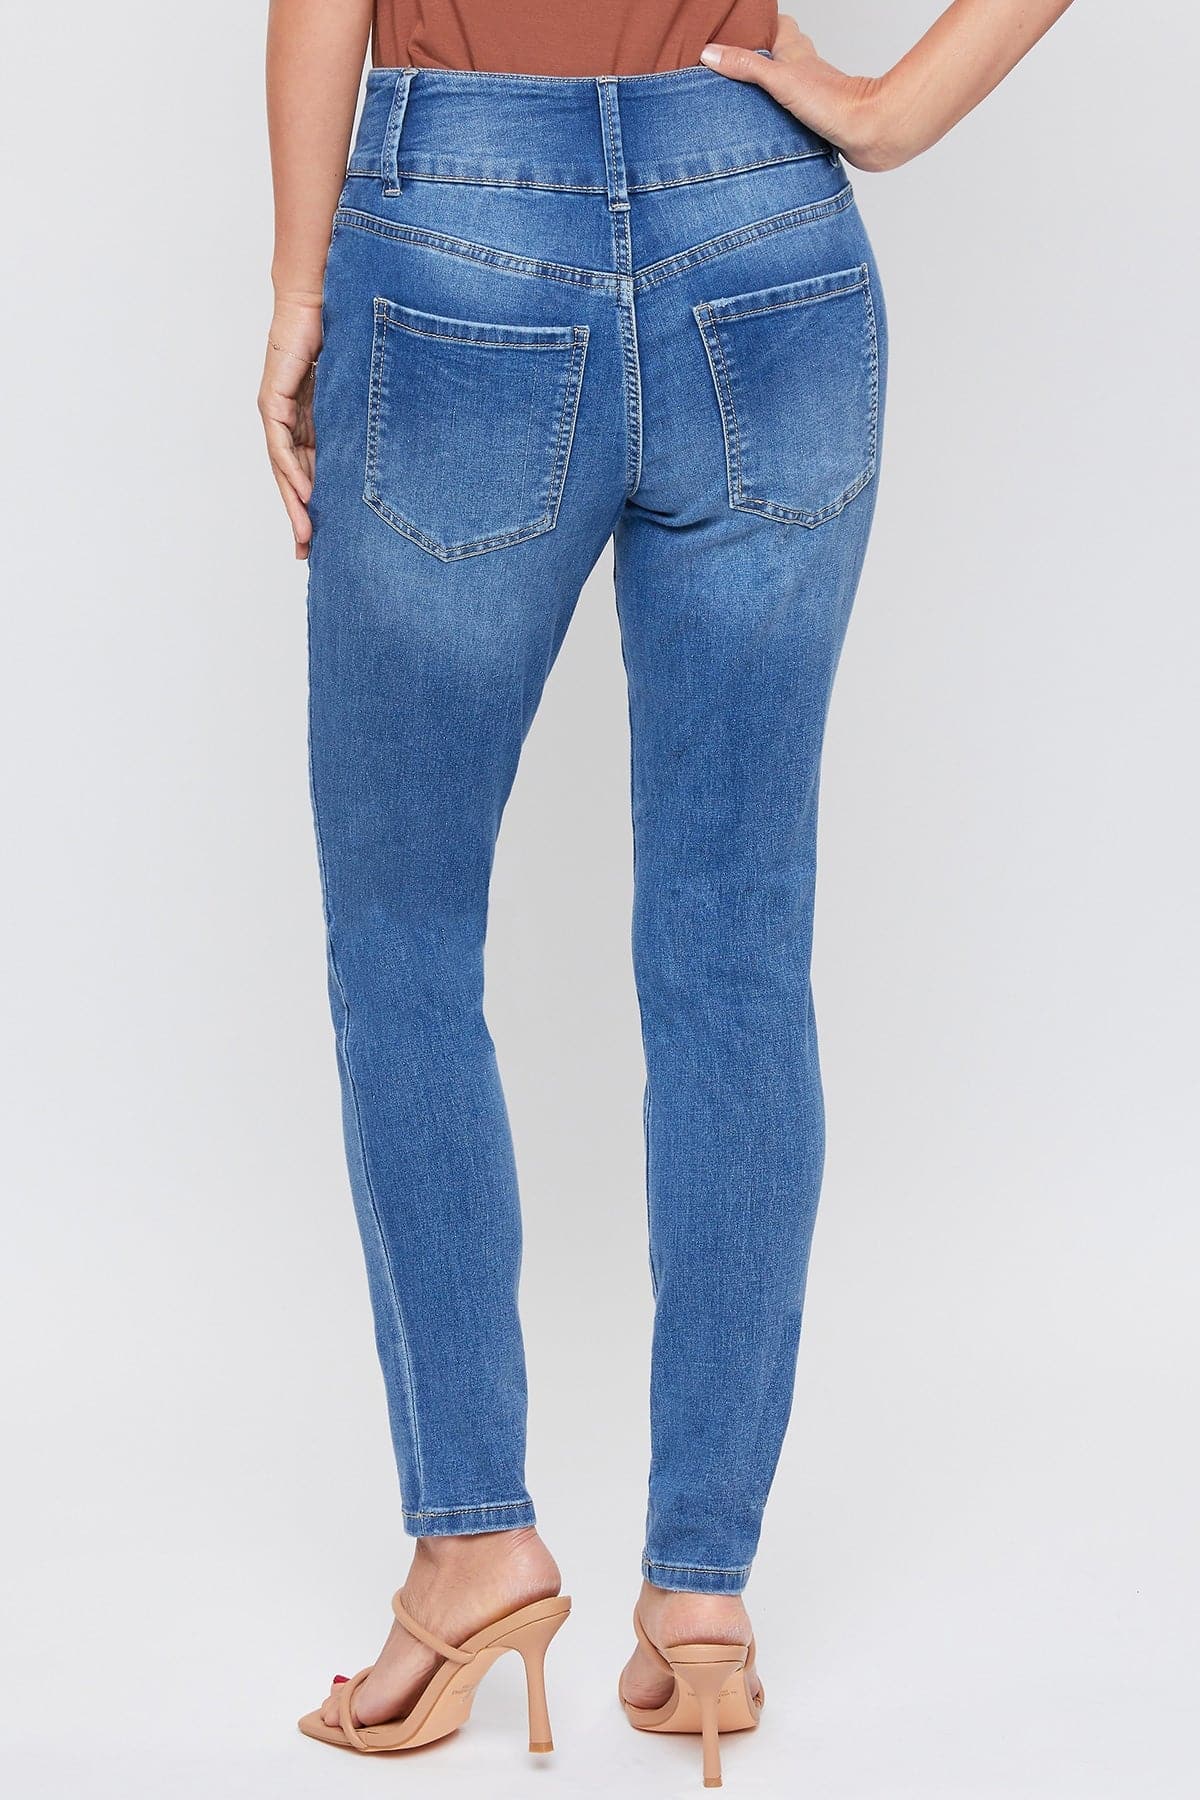 Women's Essential 3 Button High Rise Skinny Jean with Functional Front Pockets